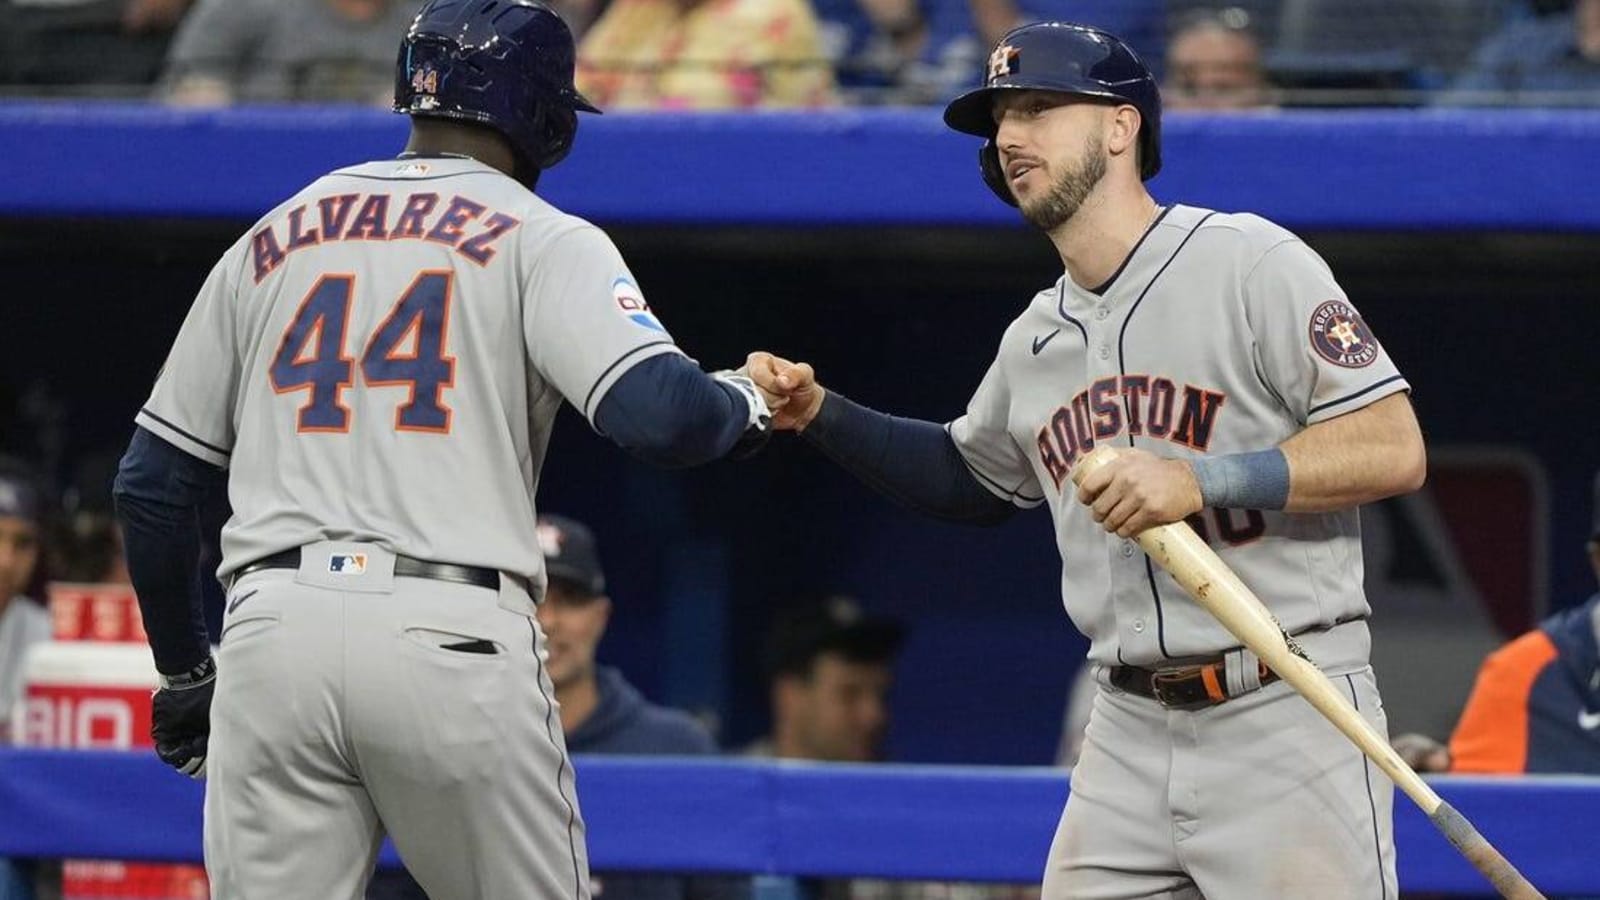 Hot-hitting Astros pursue another win at Toronto